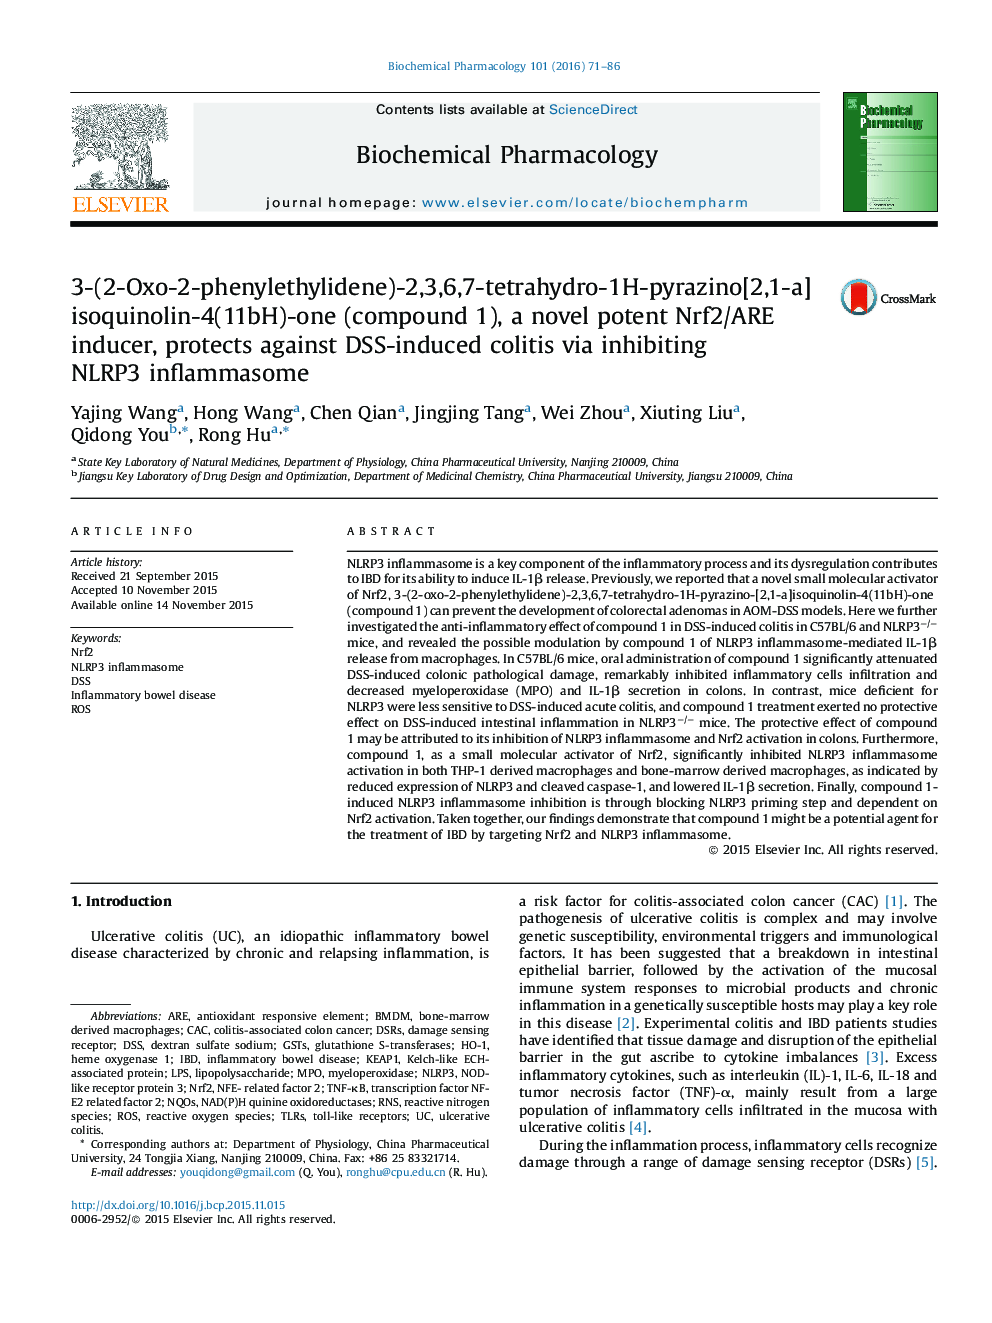 3-(2-Oxo-2-phenylethylidene)-2,3,6,7-tetrahydro-1H-pyrazino[2,1-a]isoquinolin-4(11bH)-one (compound 1), a novel potent Nrf2/ARE inducer, protects against DSS-induced colitis via inhibiting NLRP3 inflammasome